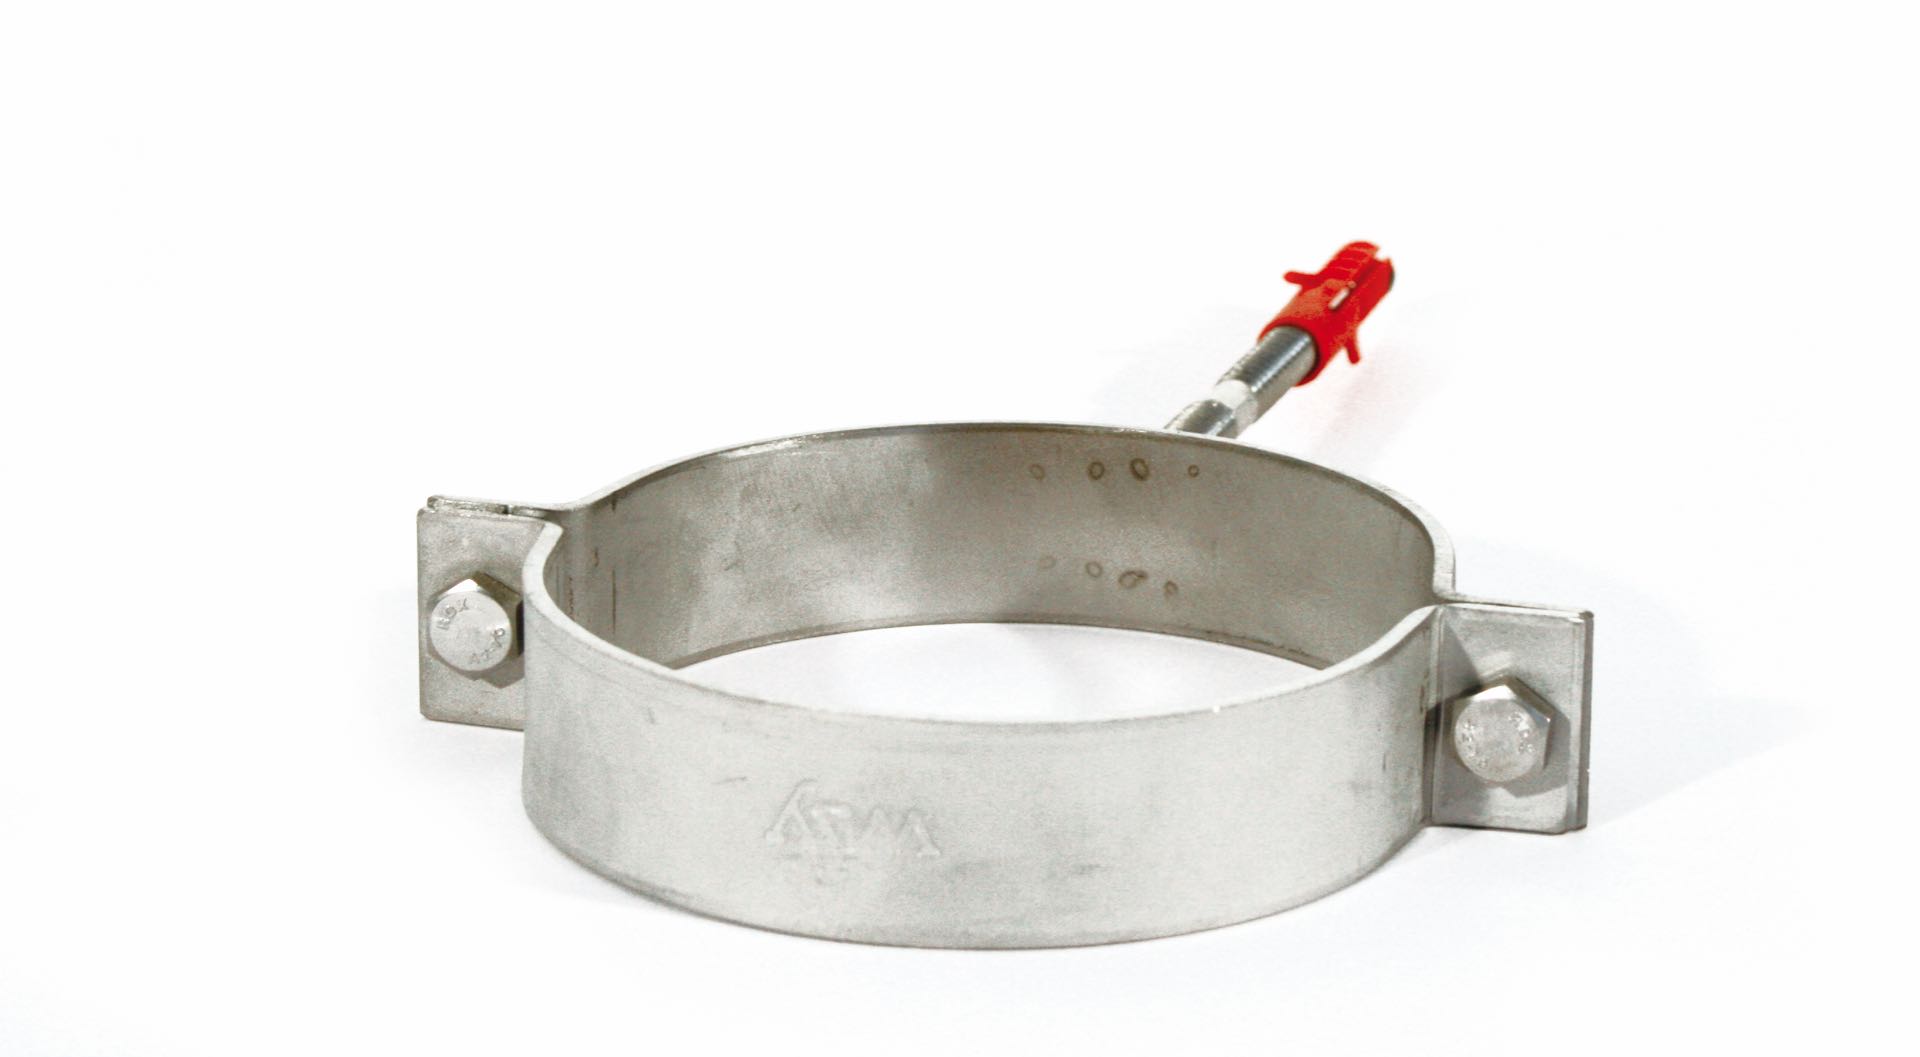 Standpipe clamp